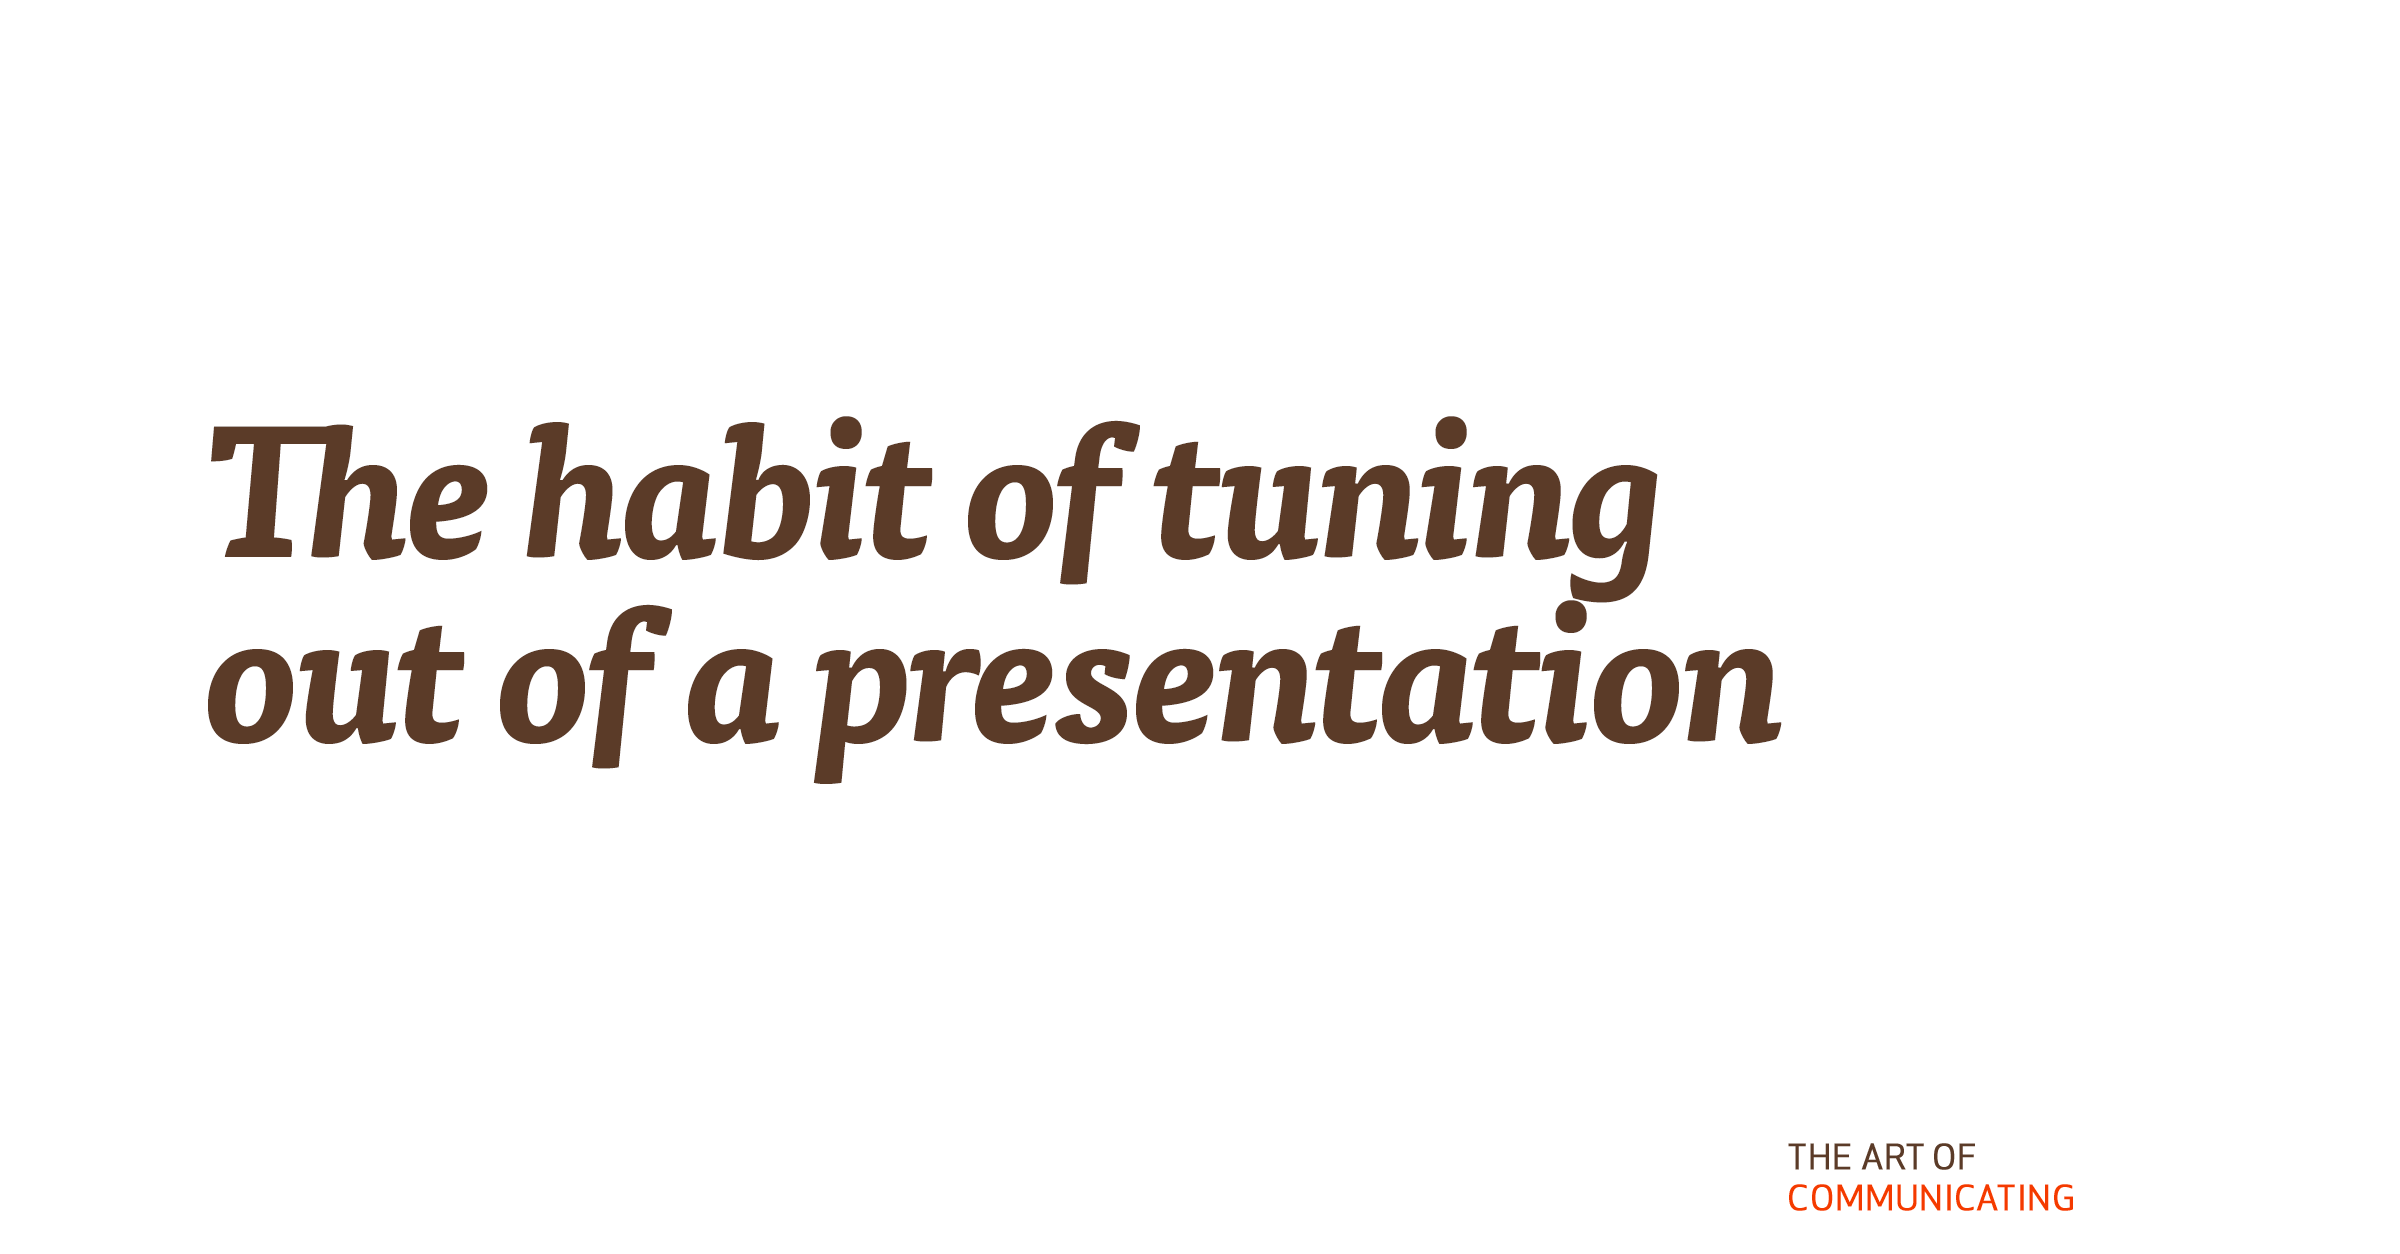 The habit of tuning out of a presentation